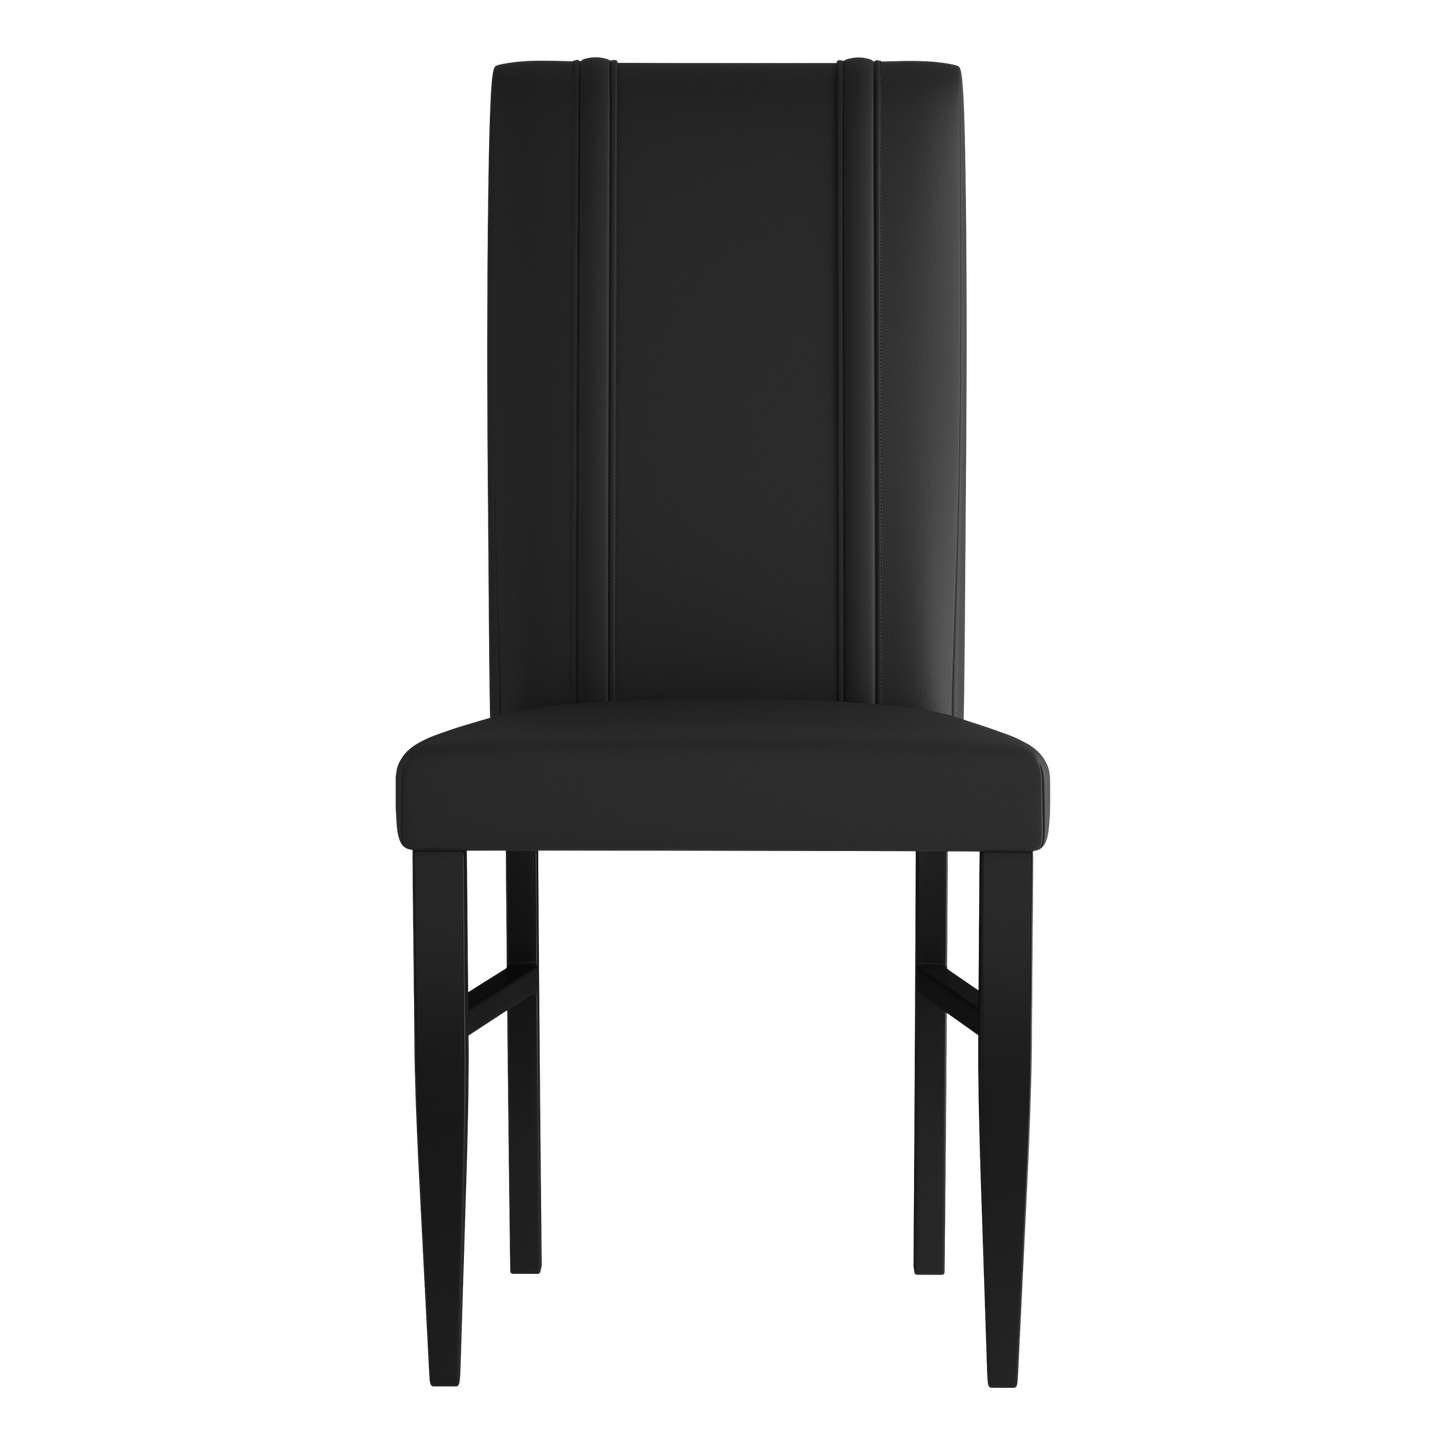 Side Chair 2000 with Boston BruinsLogo Set of 2